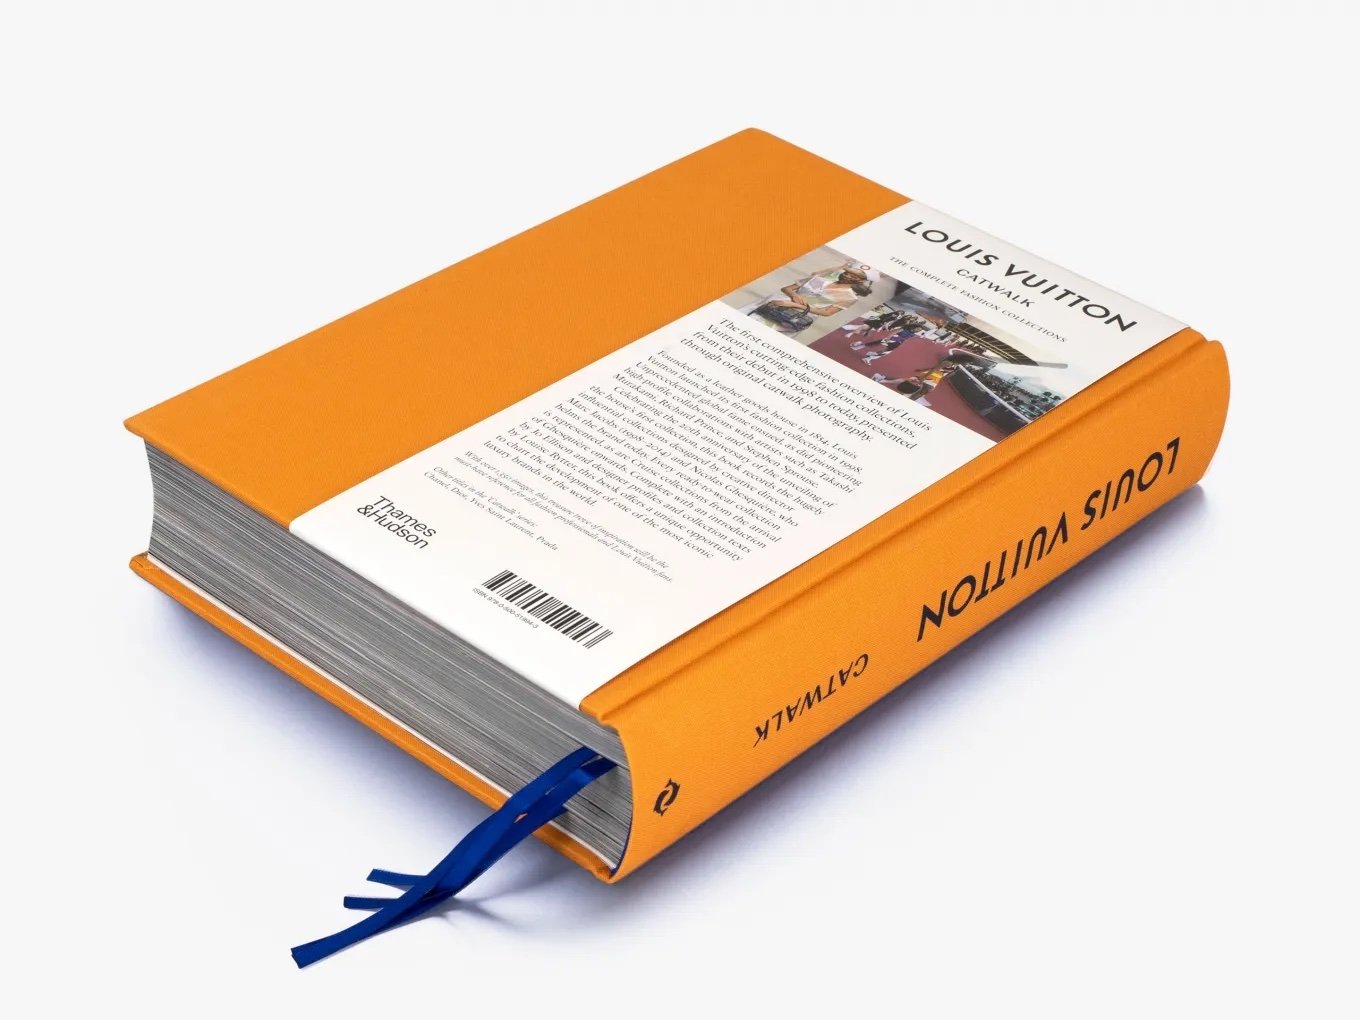 Thames & Hudson: The Complete Collections  Louis Vuitton Catwalk Book —  Adorn The Common